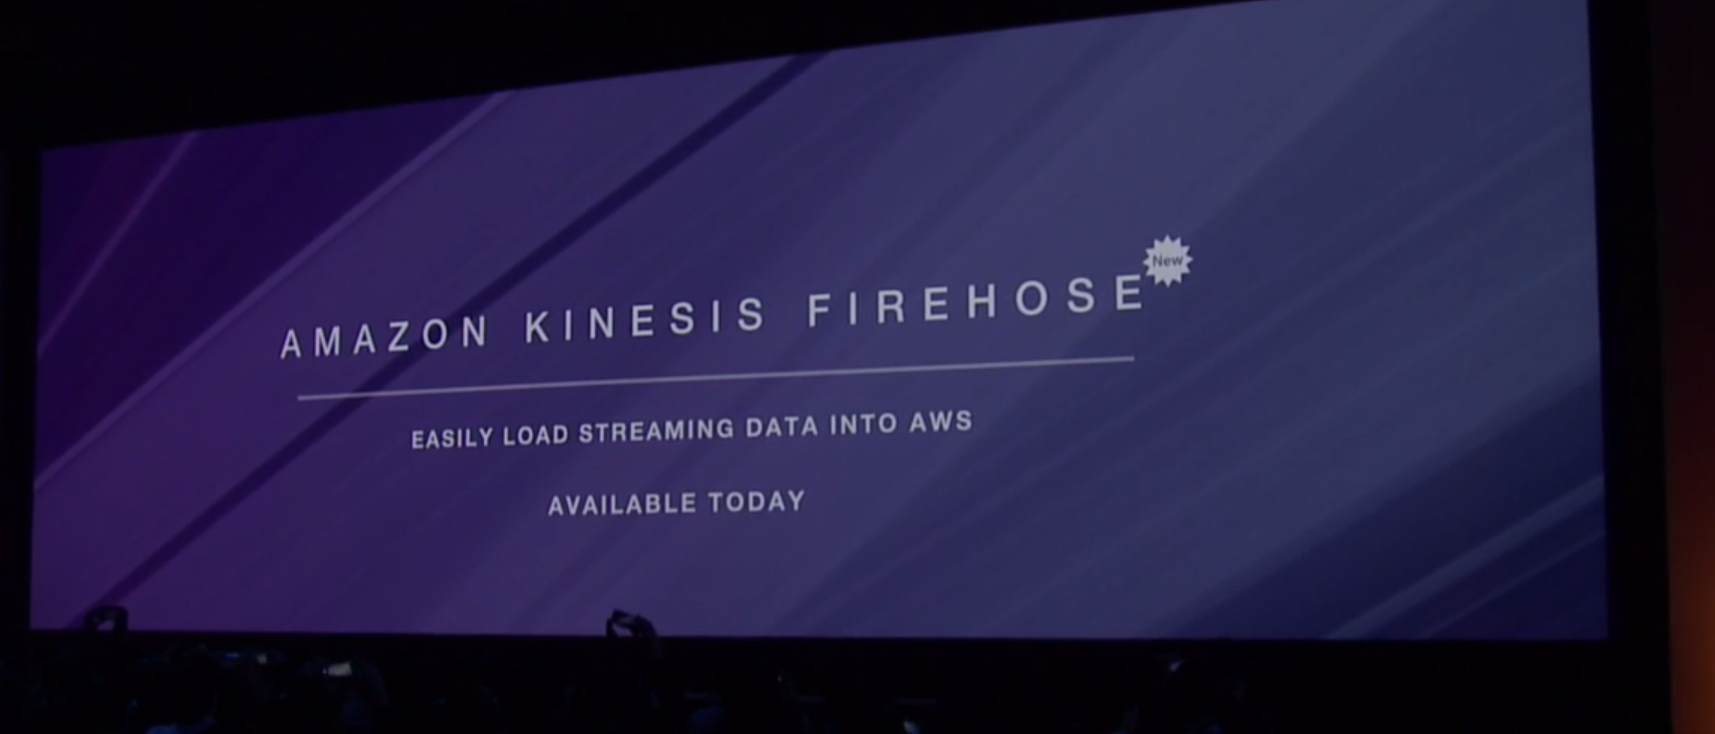 Amazon Web Services introduces the Amazon Kinesis Firehose service at the 2015 AWS re:Invent conference in Las Vegas on Oct. 7.